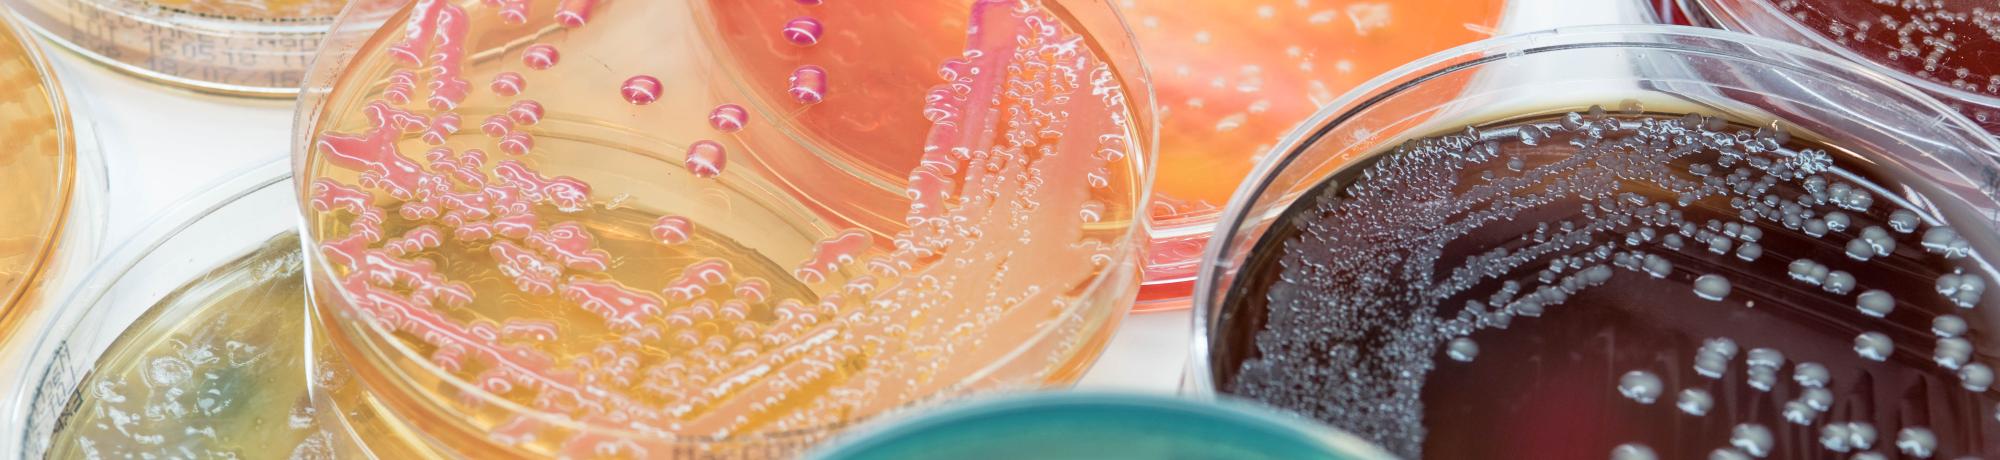 Colorful microbiology plates